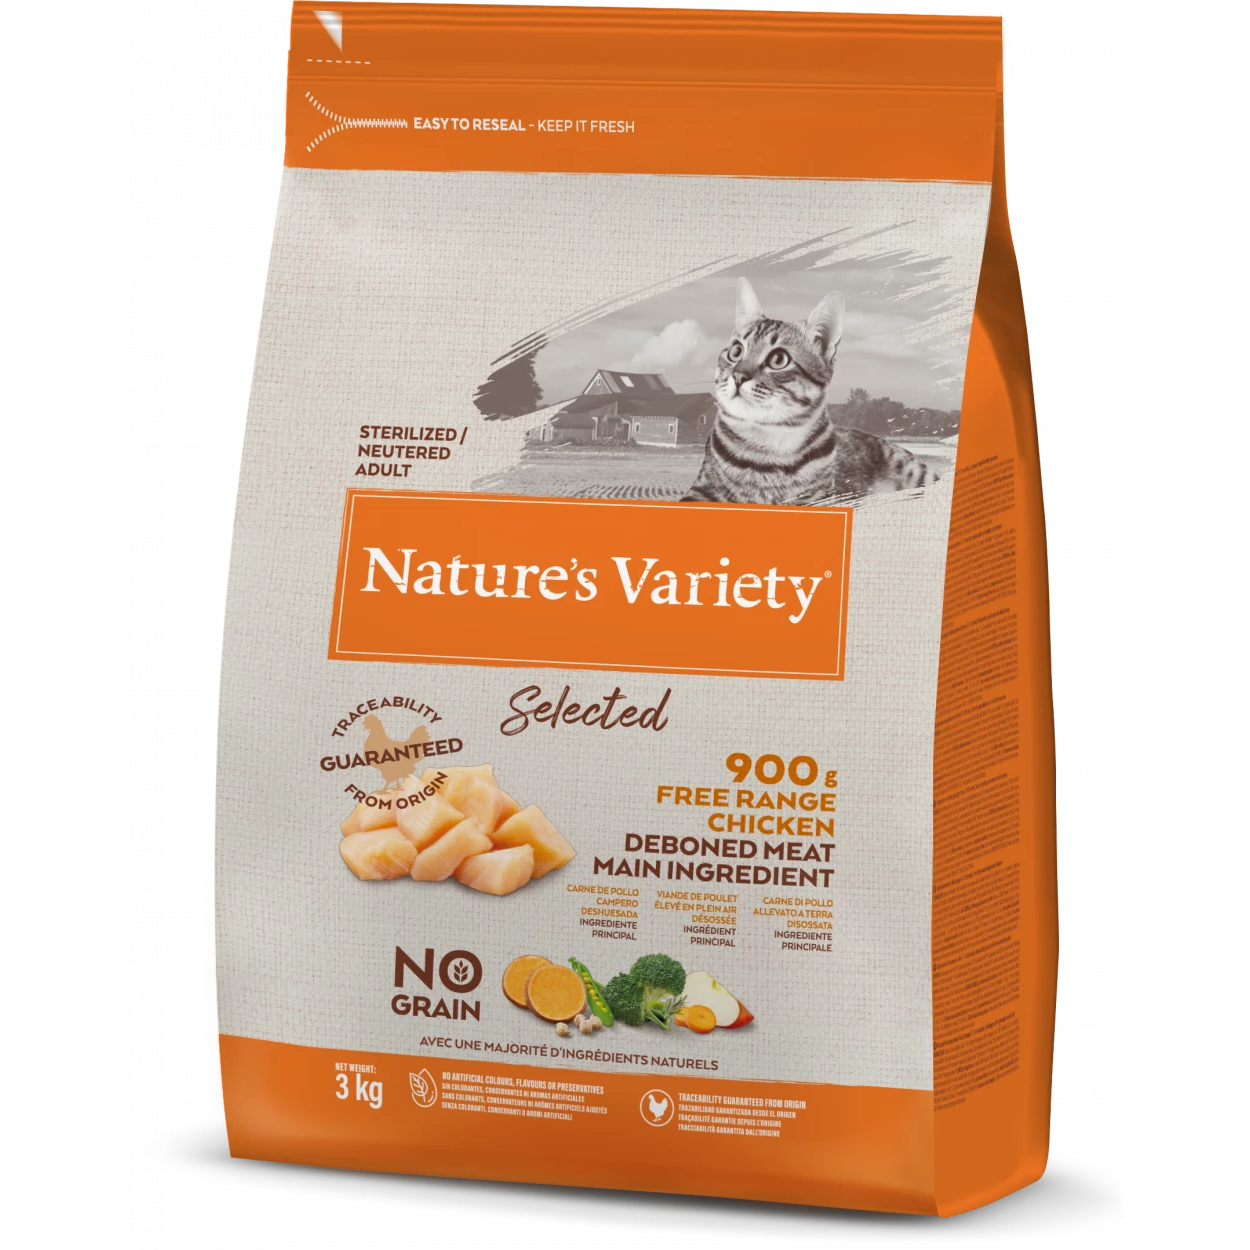 Nature's Variety Selected Sterilised/Neutered Adult Cat Food Salmon Or Chicken